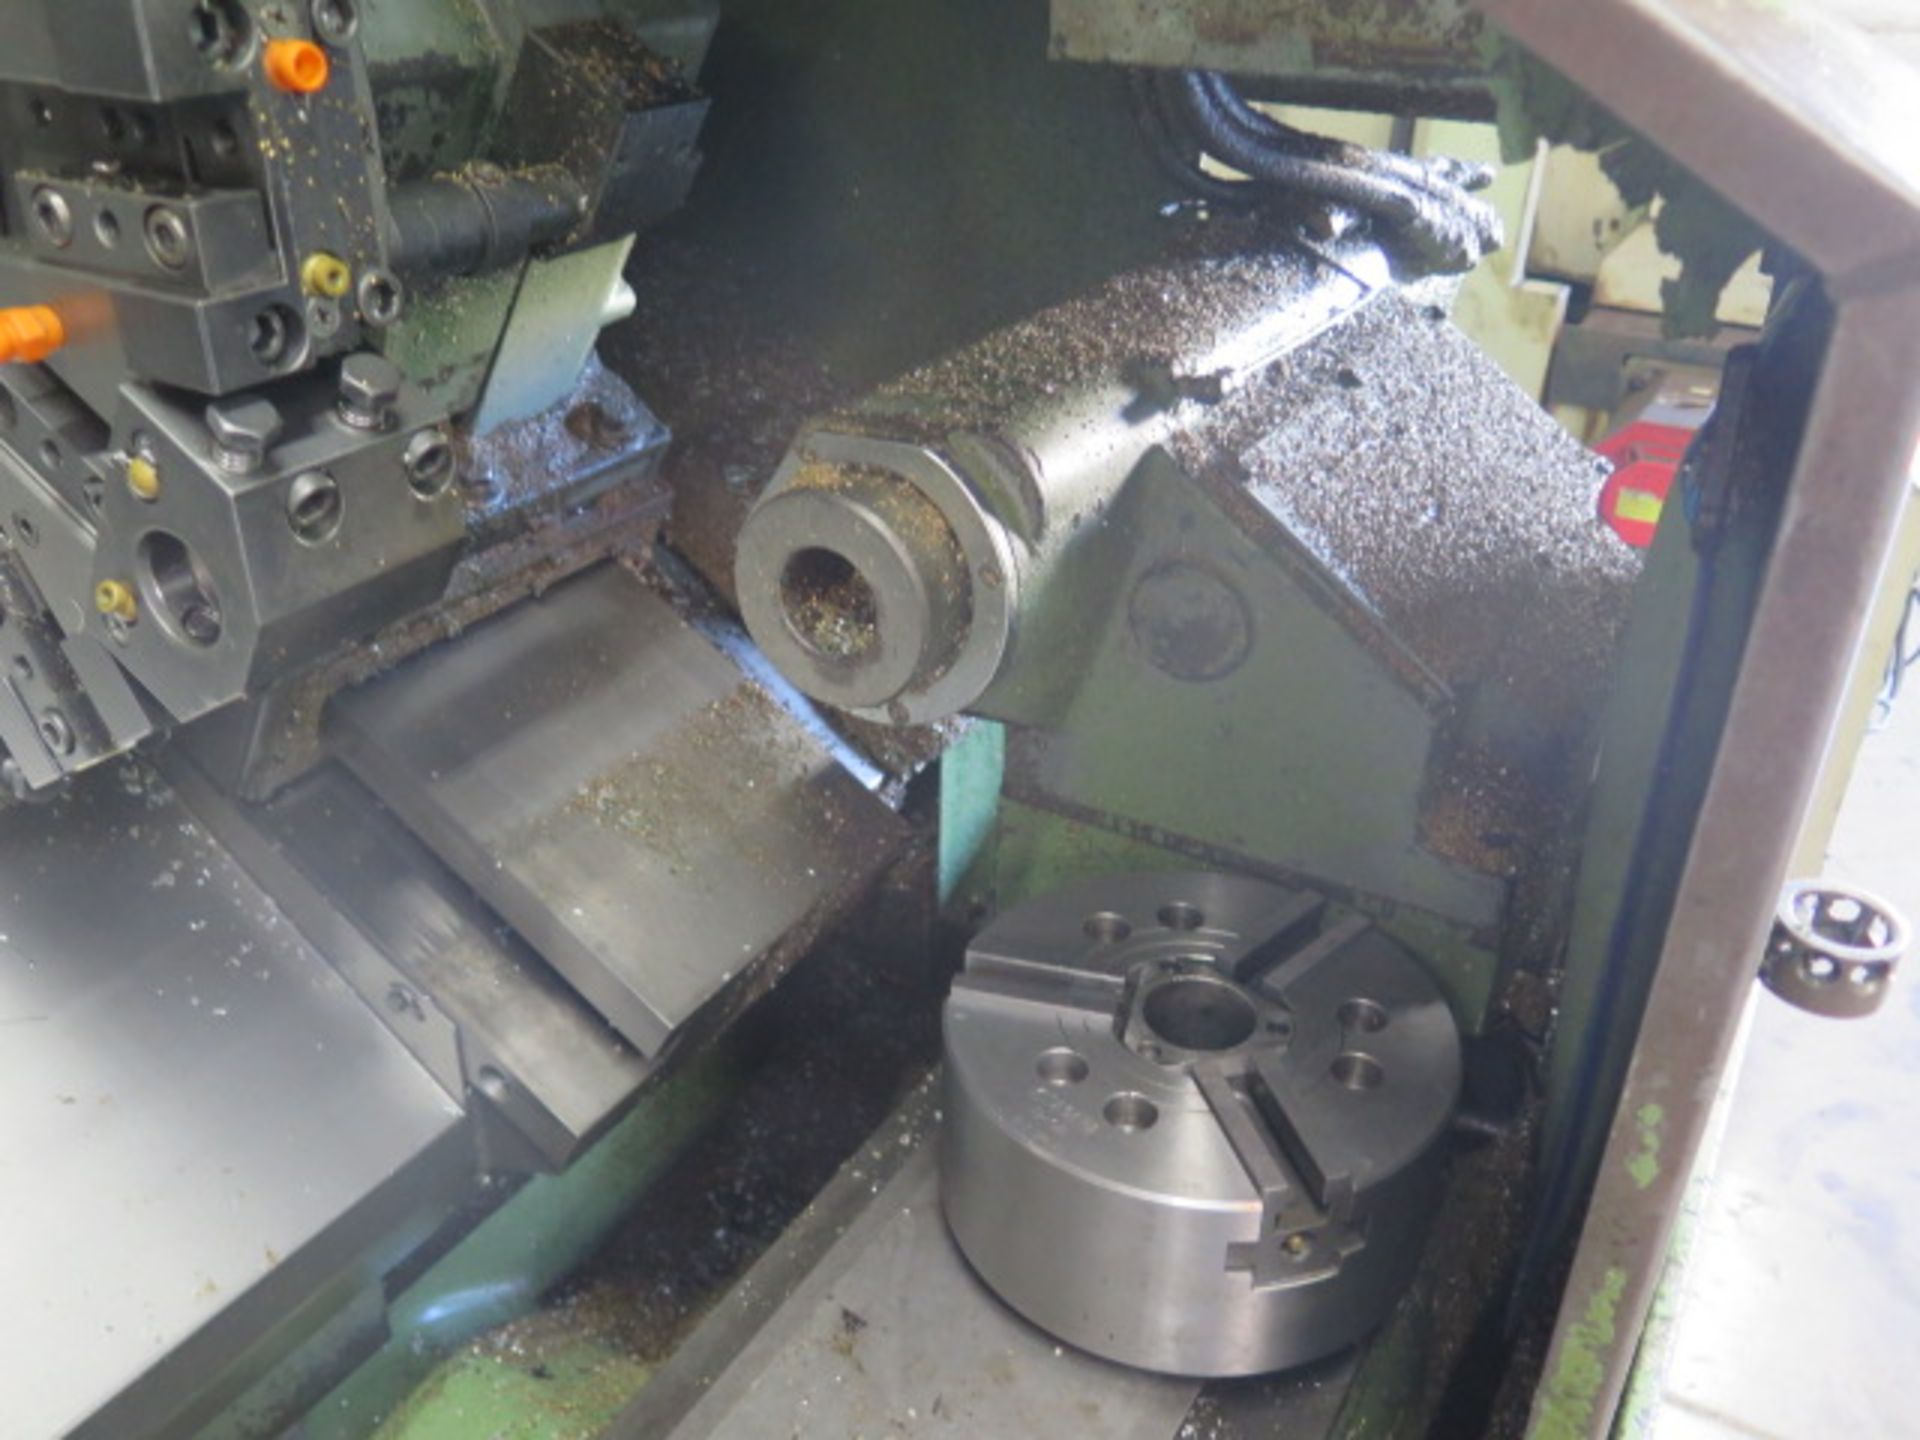 Okuma LB15 CNC Turning Center s/n 9282 w/ OSP5000 L-G Controls, 12-Station Turret, SOLD AS IS - Image 7 of 12